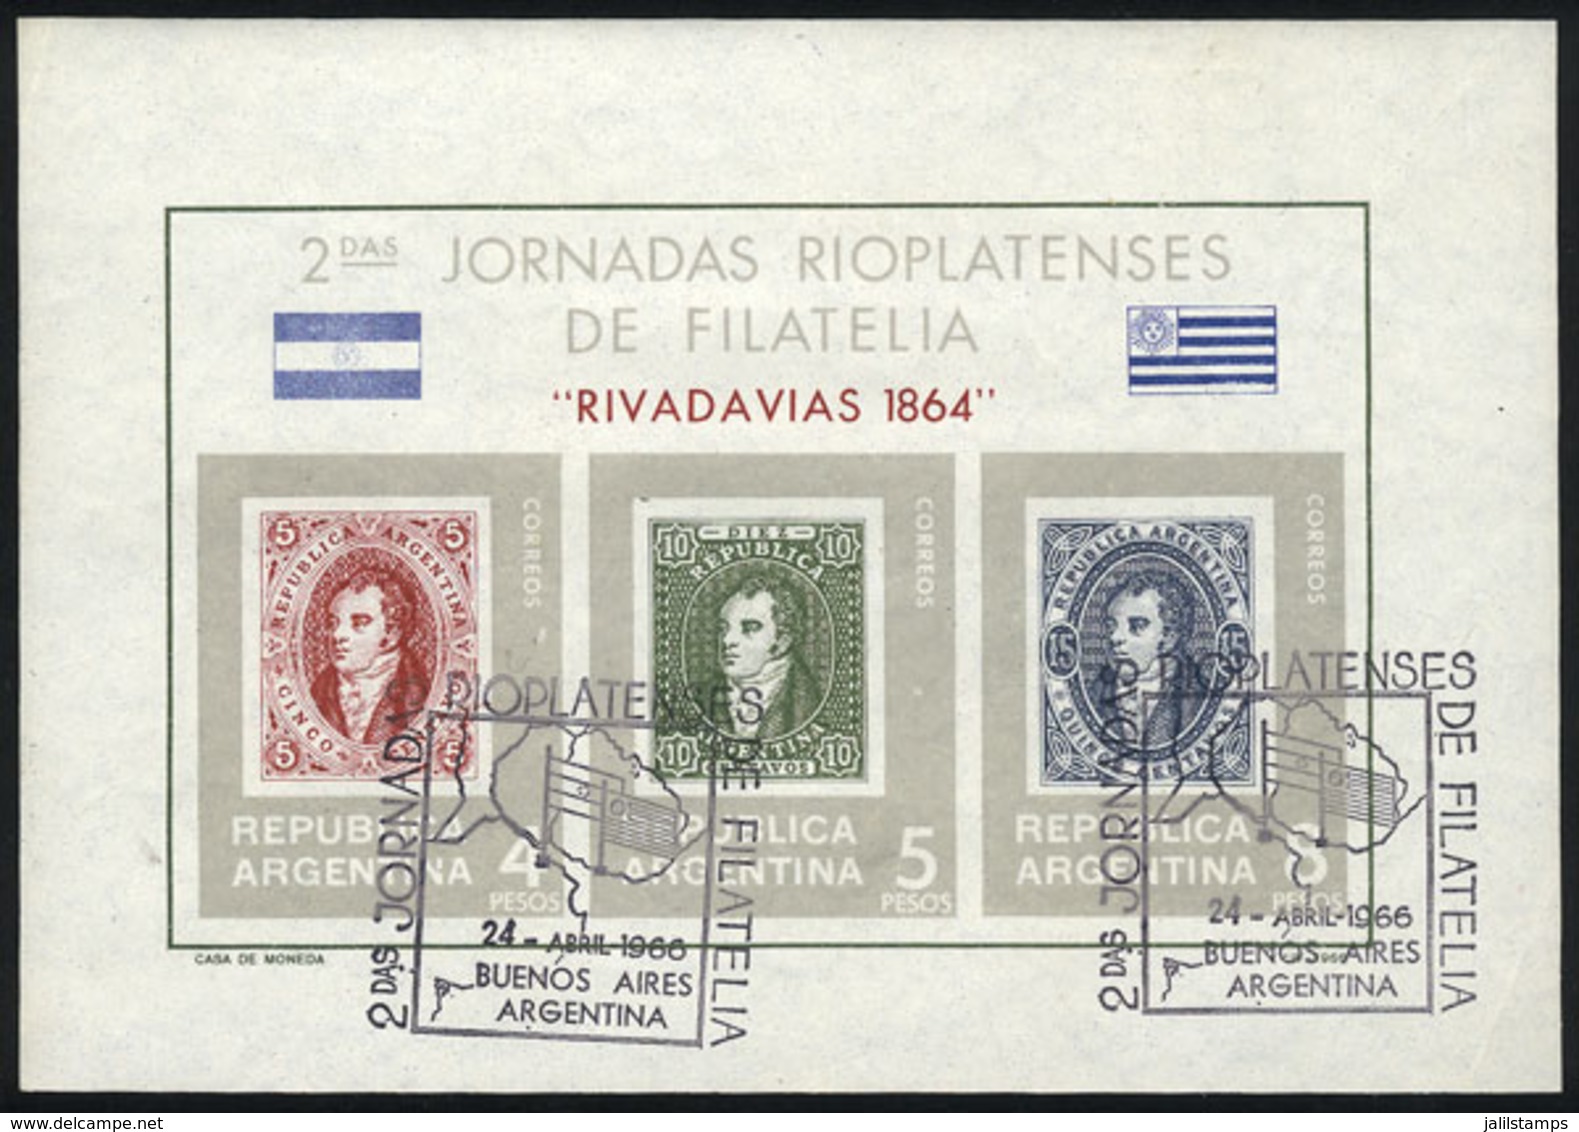 ARGENTINA: GJ.HB 20, River Plate Philatelic Meeting, With Special Postmarks, Fine Quality - Blocs-feuillets